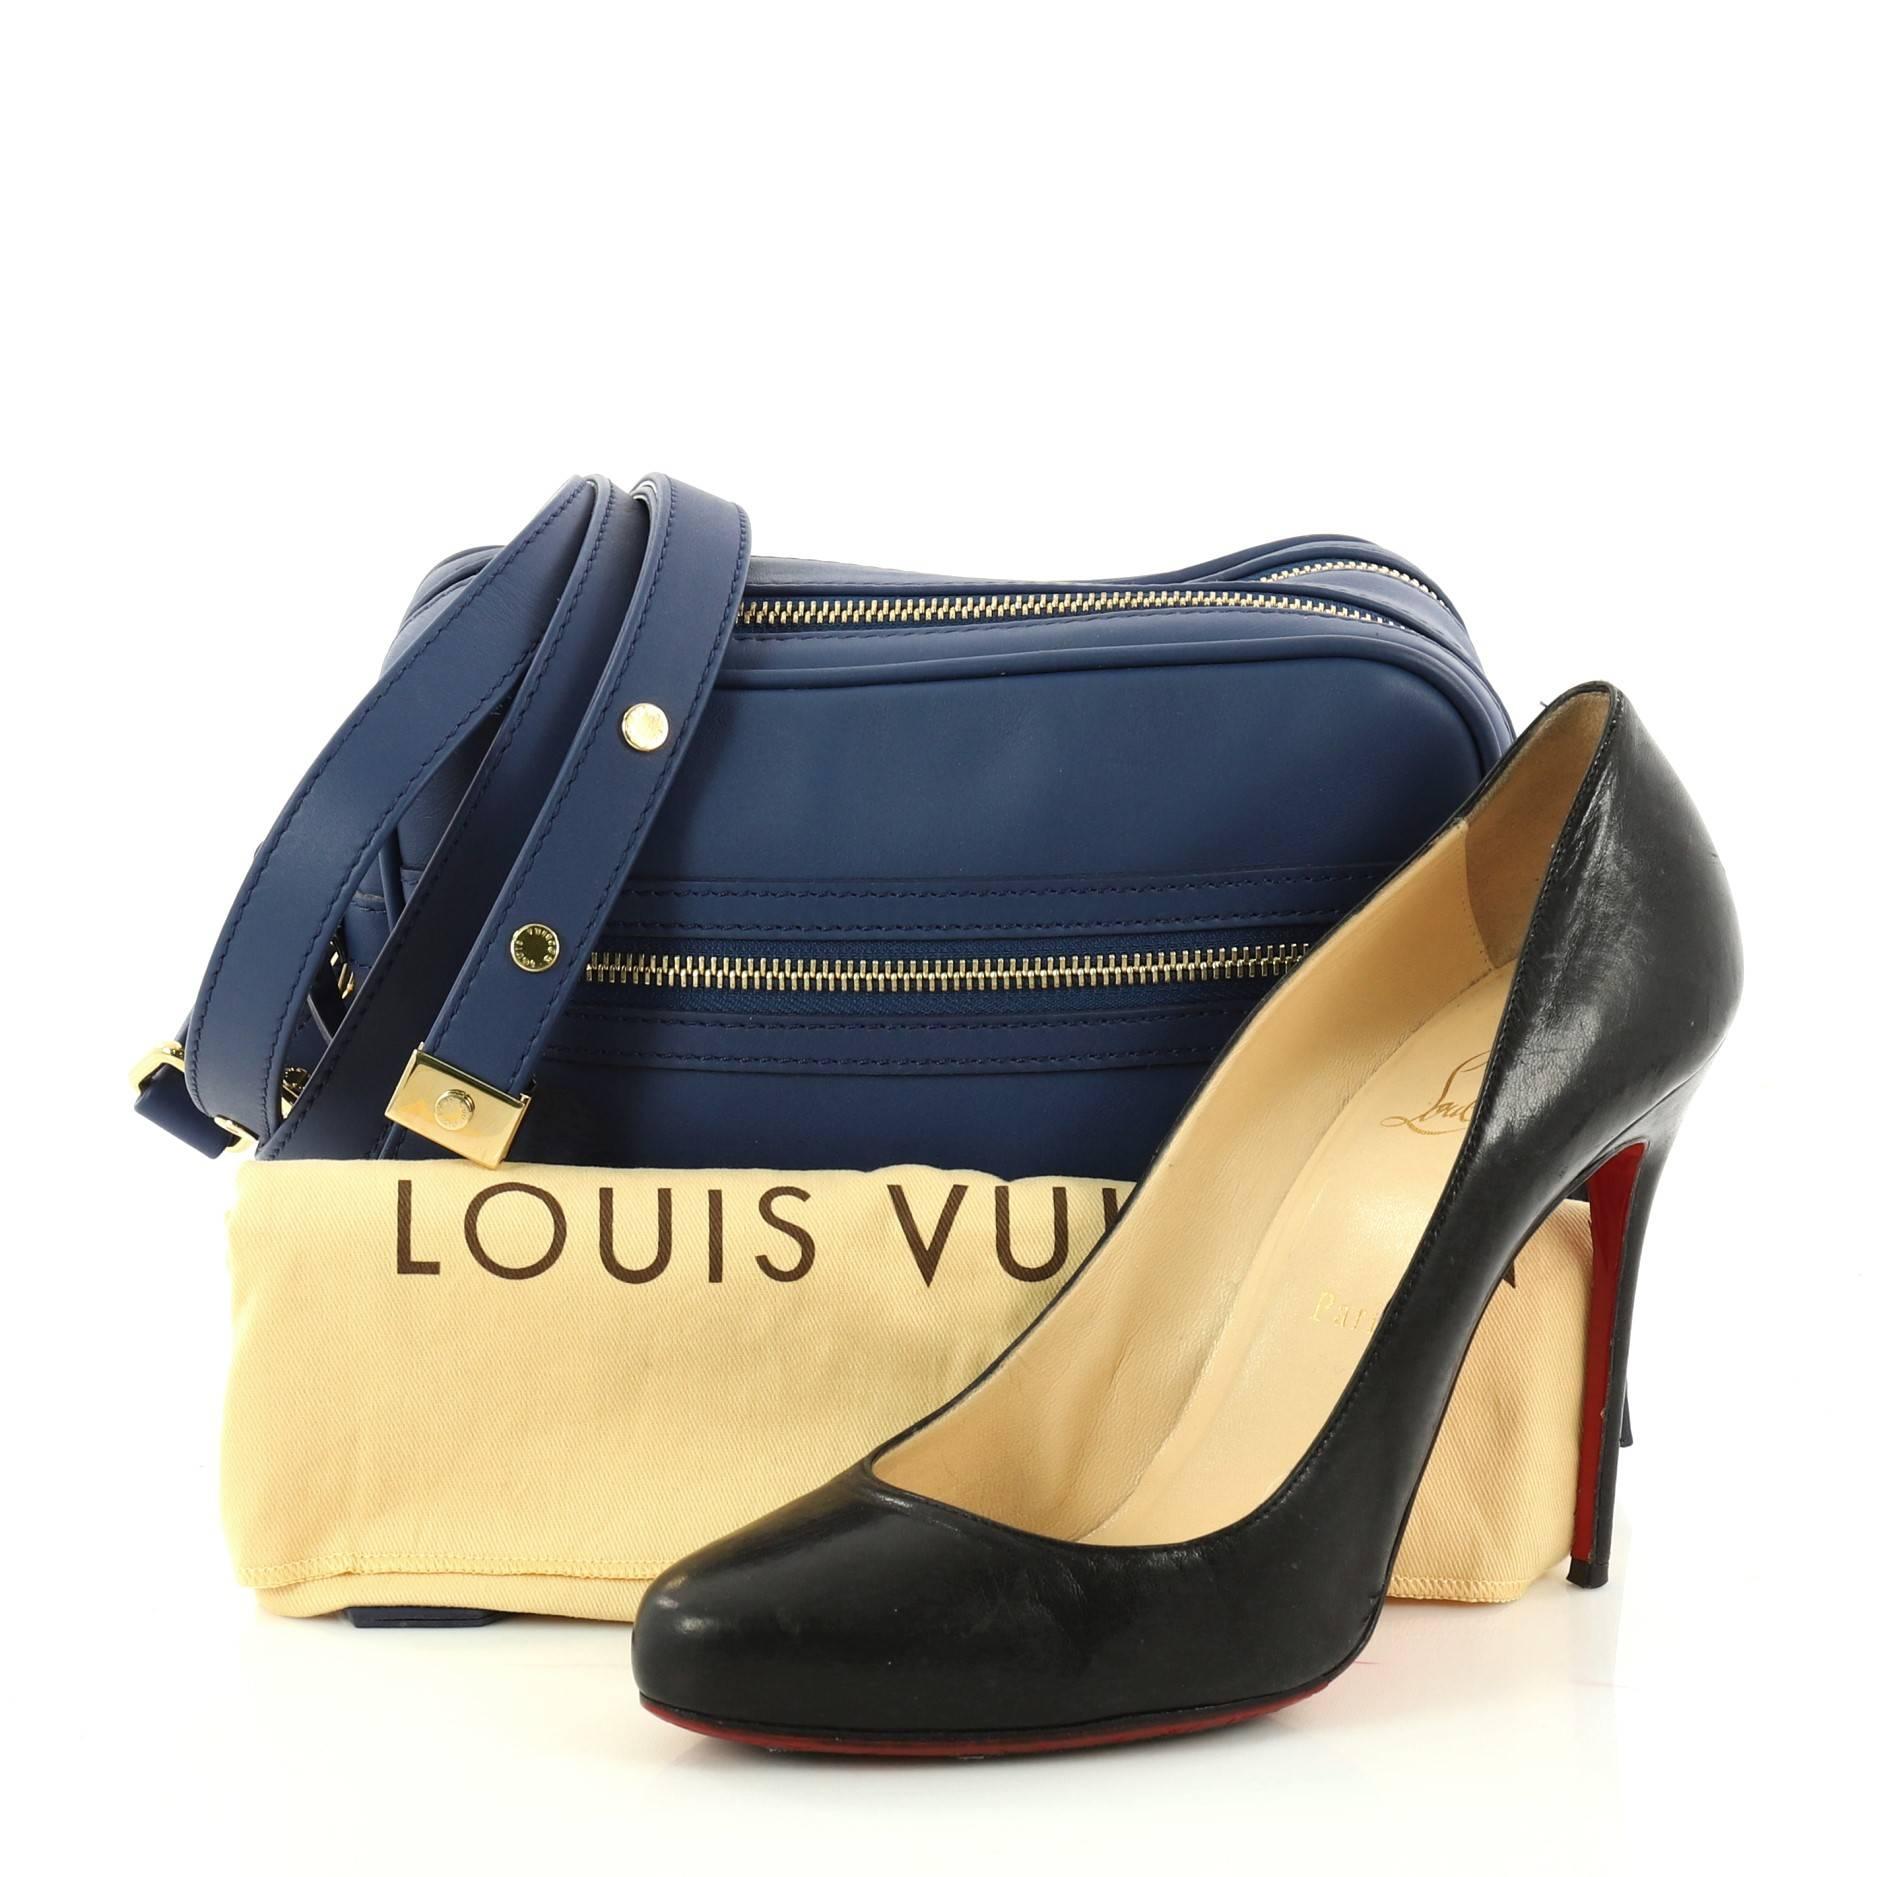 This authentic Louis Vuitton Flight Paname Takeoff Bag Leather Small is a limited edition bag perfect for your everyday excursions. Crafted in blue leather, this bag features flat adjustable shoulder strap, exterior front zip pocket and back slip